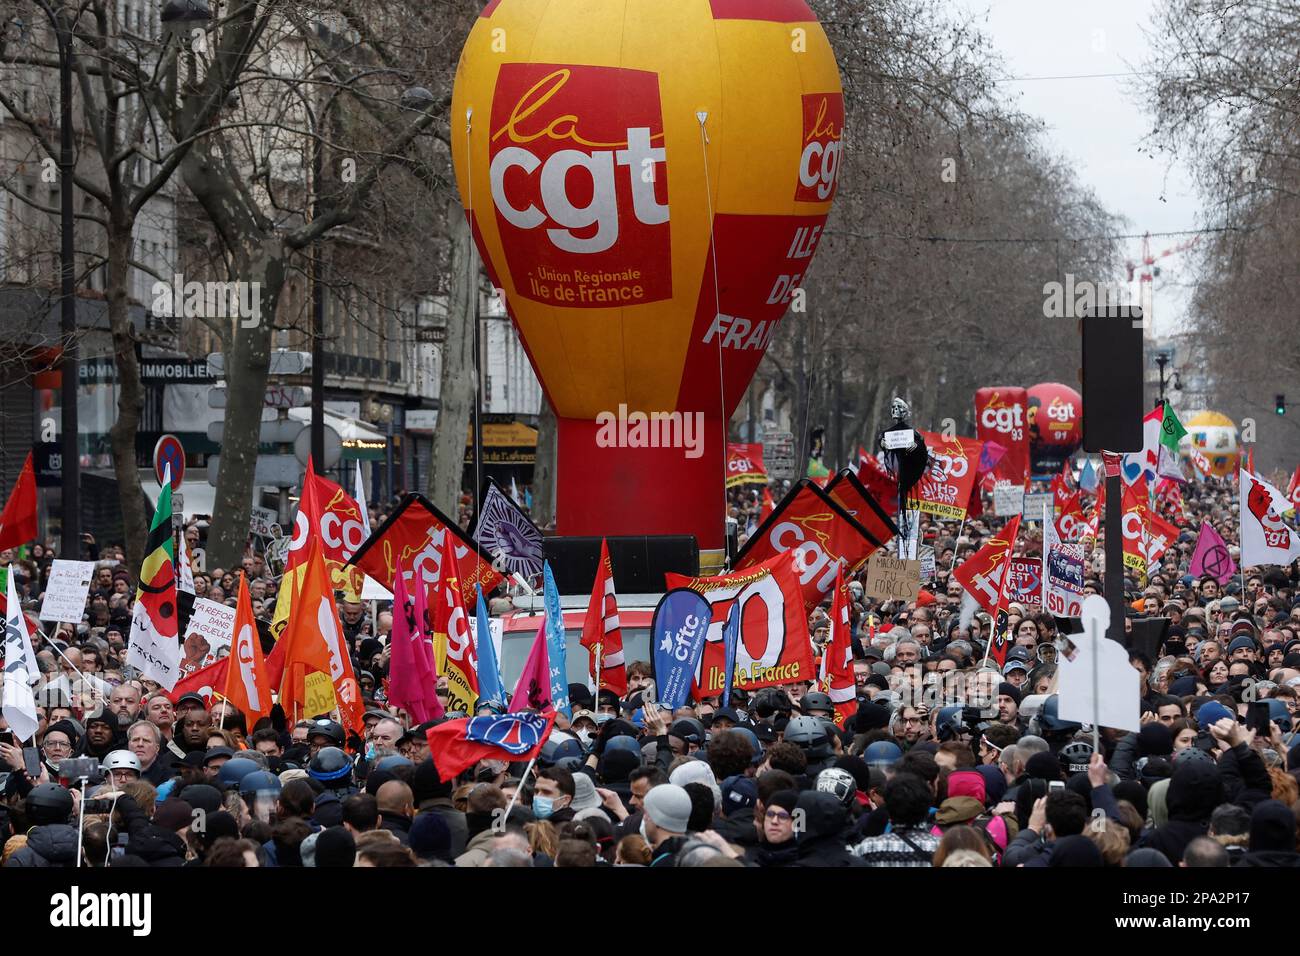 General Confederation of Labour (CGT) trade union signs are seen as demonstrators march against the government's pension reform plan in Paris, France, March 11, 2023. REUTERS/Benoit Tessier Stock Photo